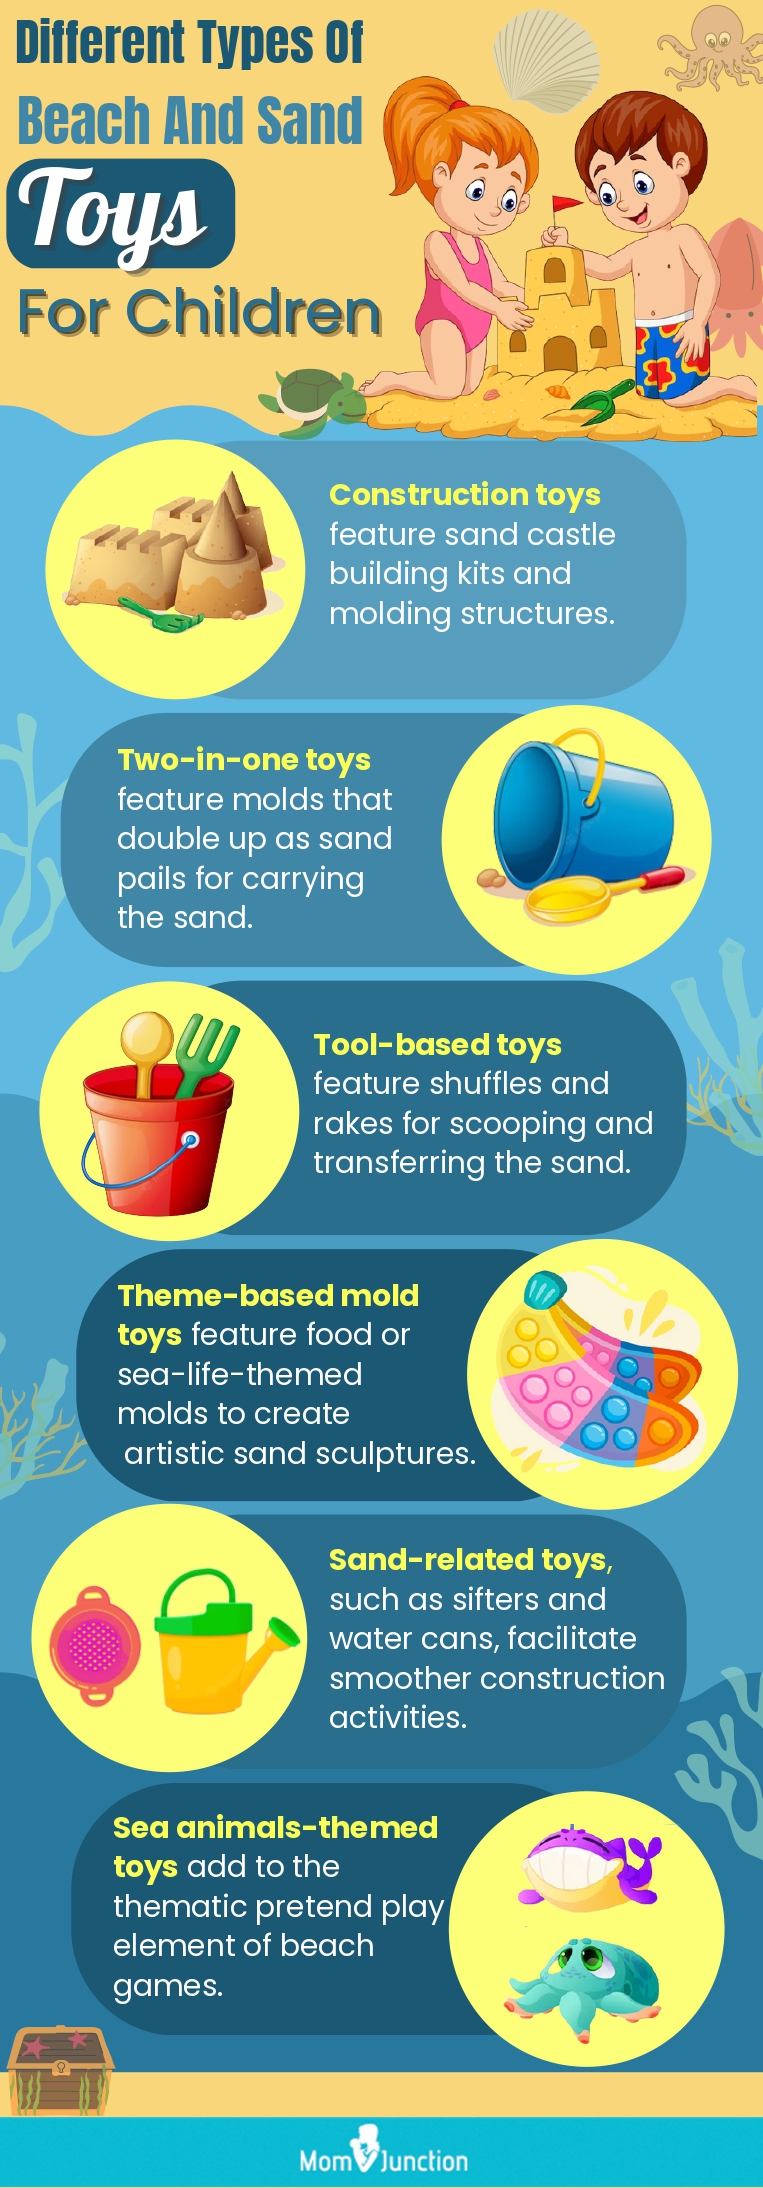 Different Types Of Beach And Sand Toys For Children (infographic)